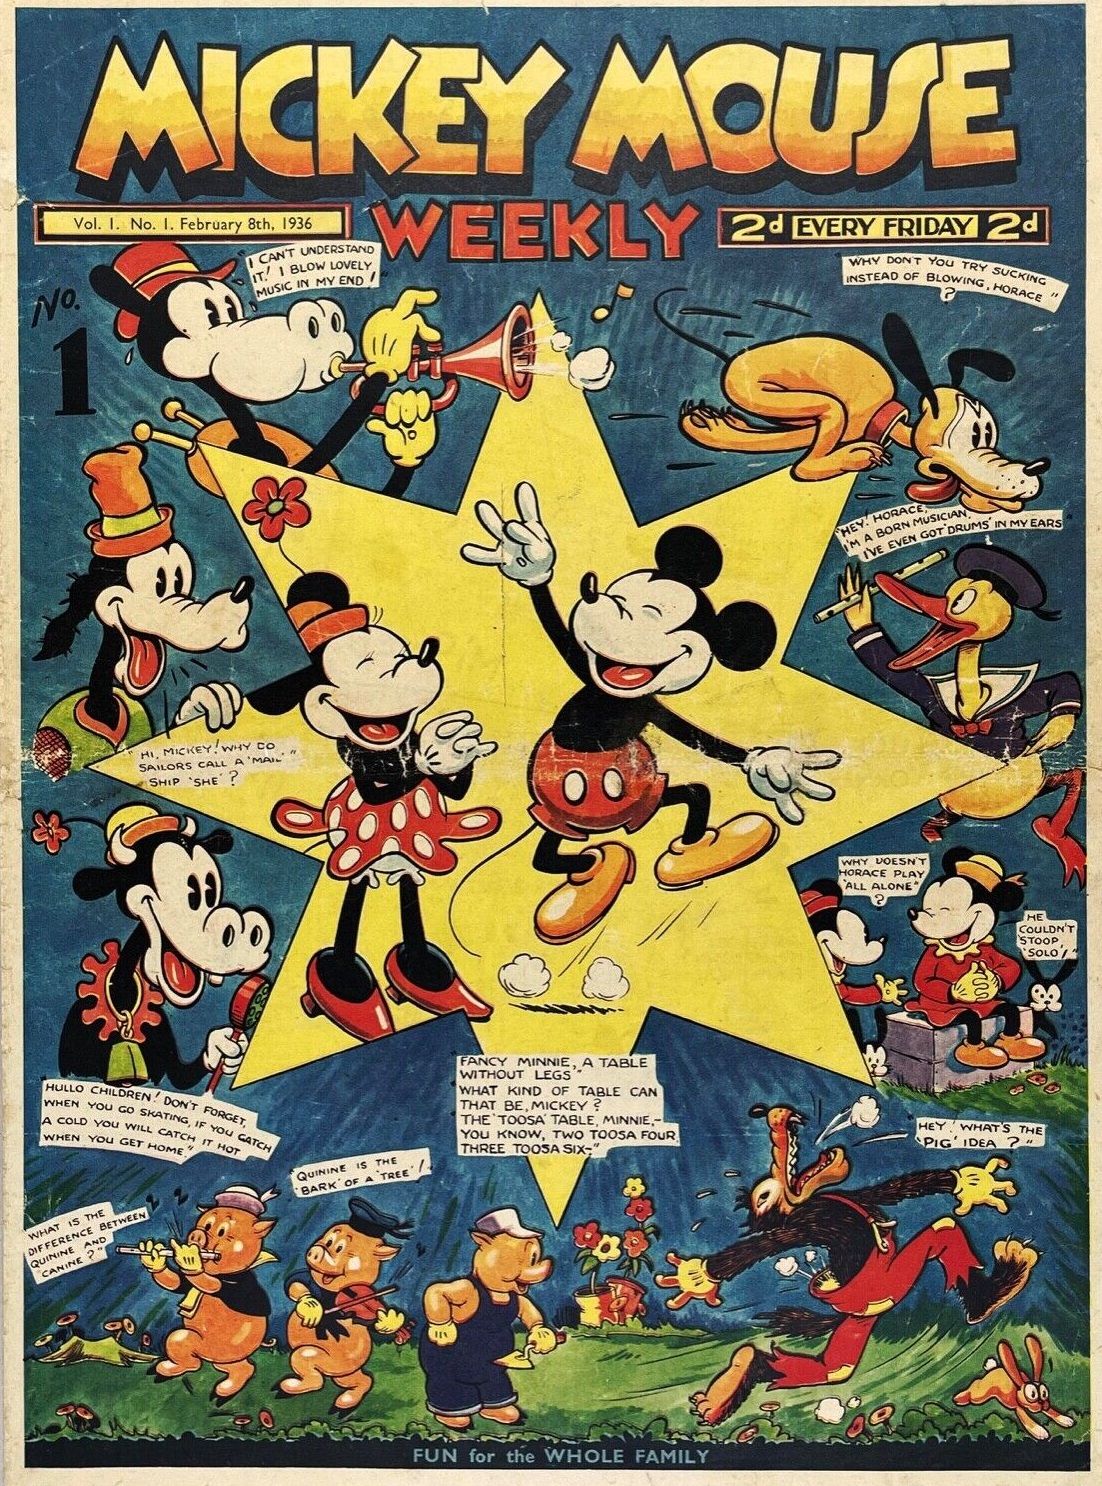 mickey-mouse-weekly-1-1